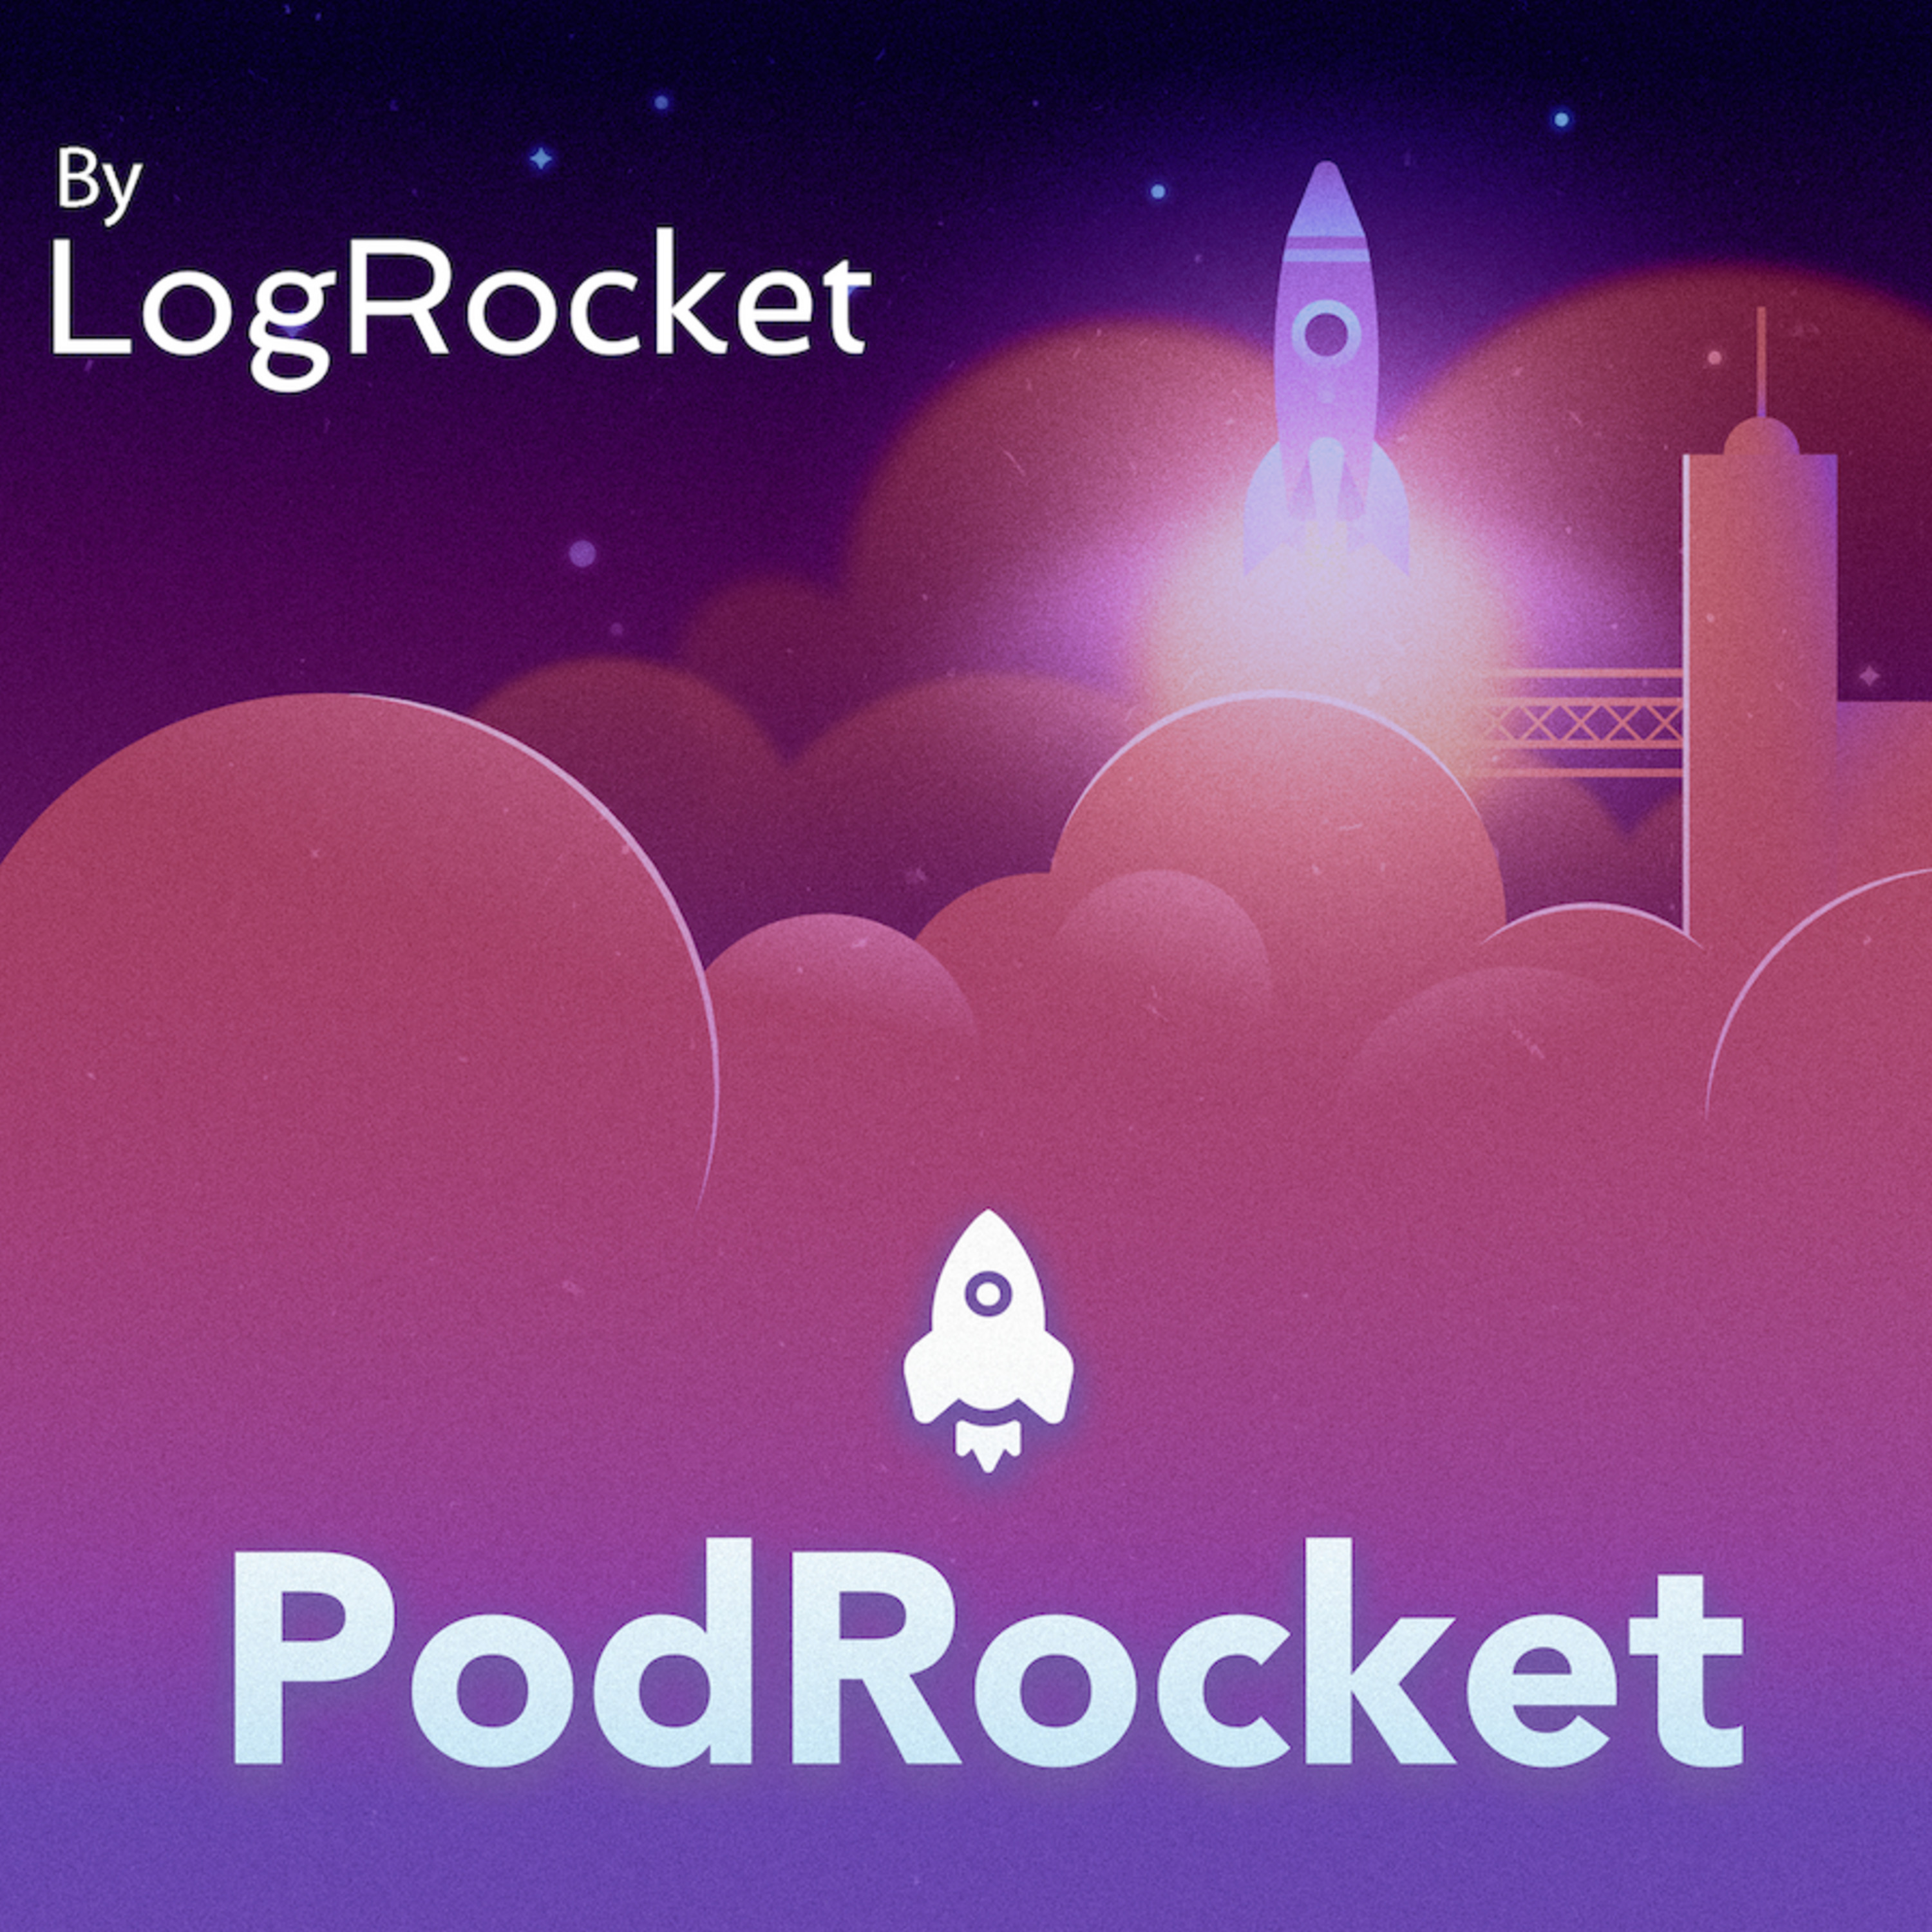 Tell us what you think of PodRocket!